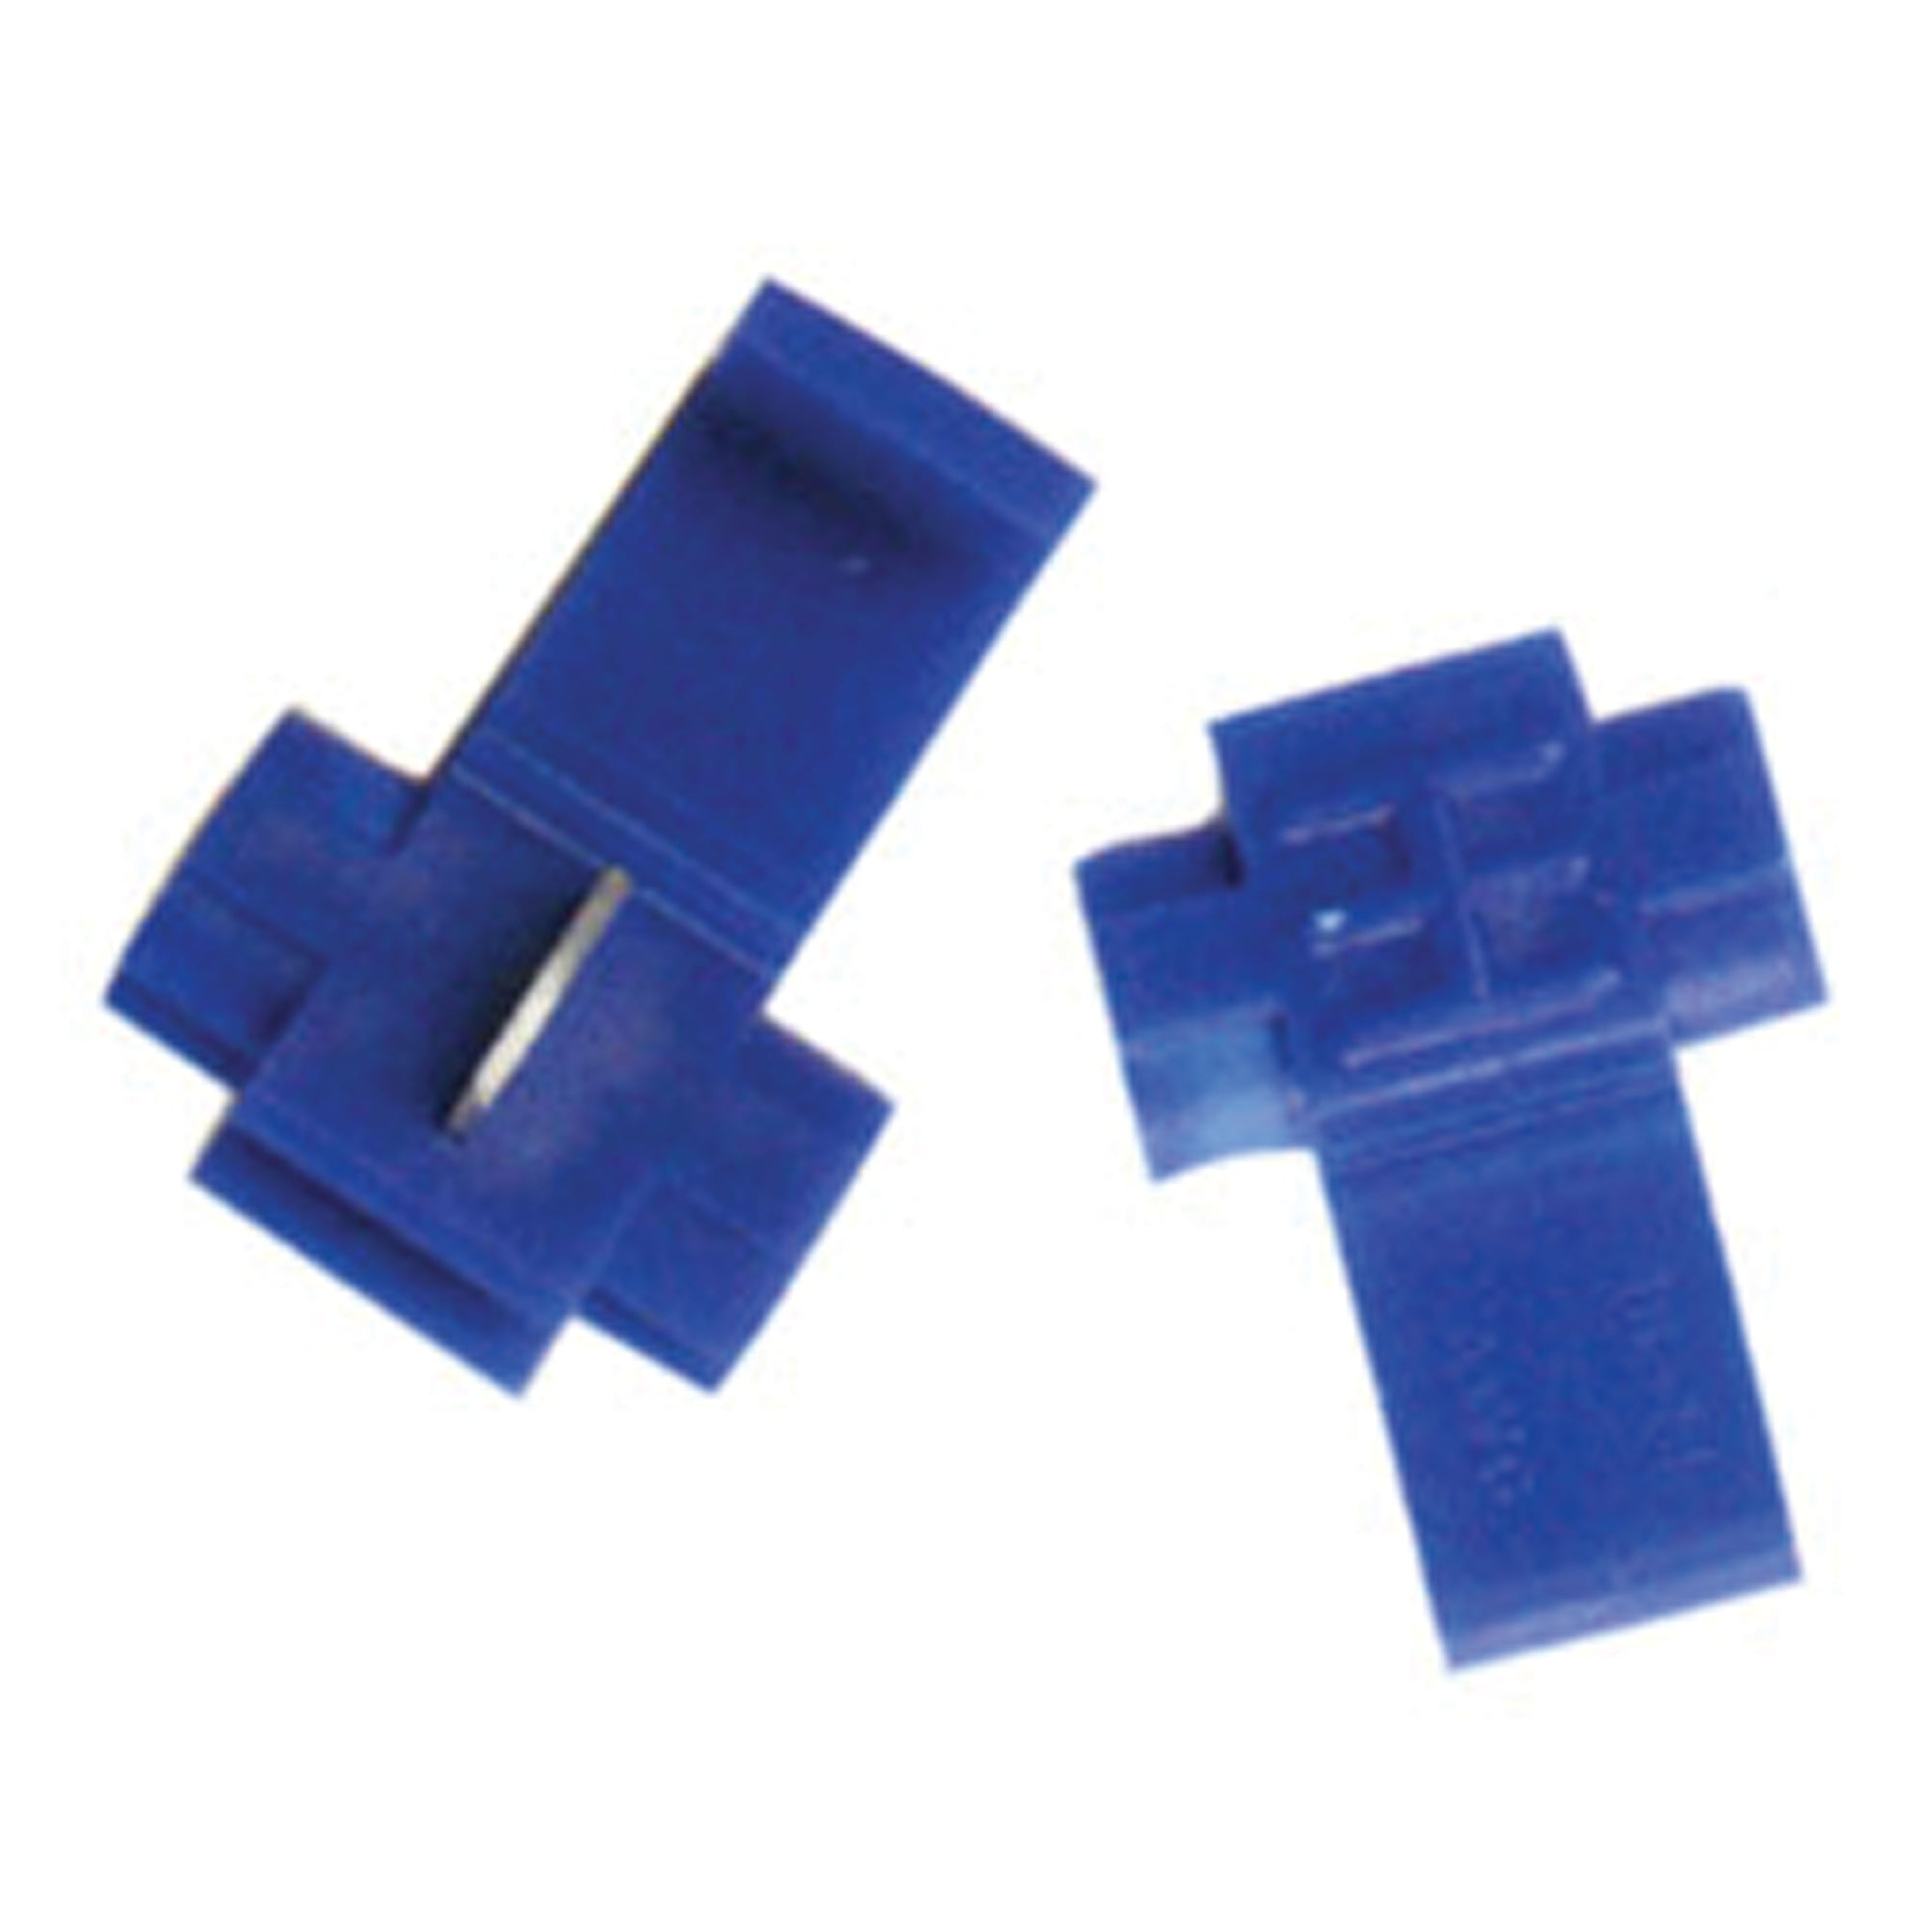 Ancor 230615 Splice Connector - 18-14, Blue, Pack of 4